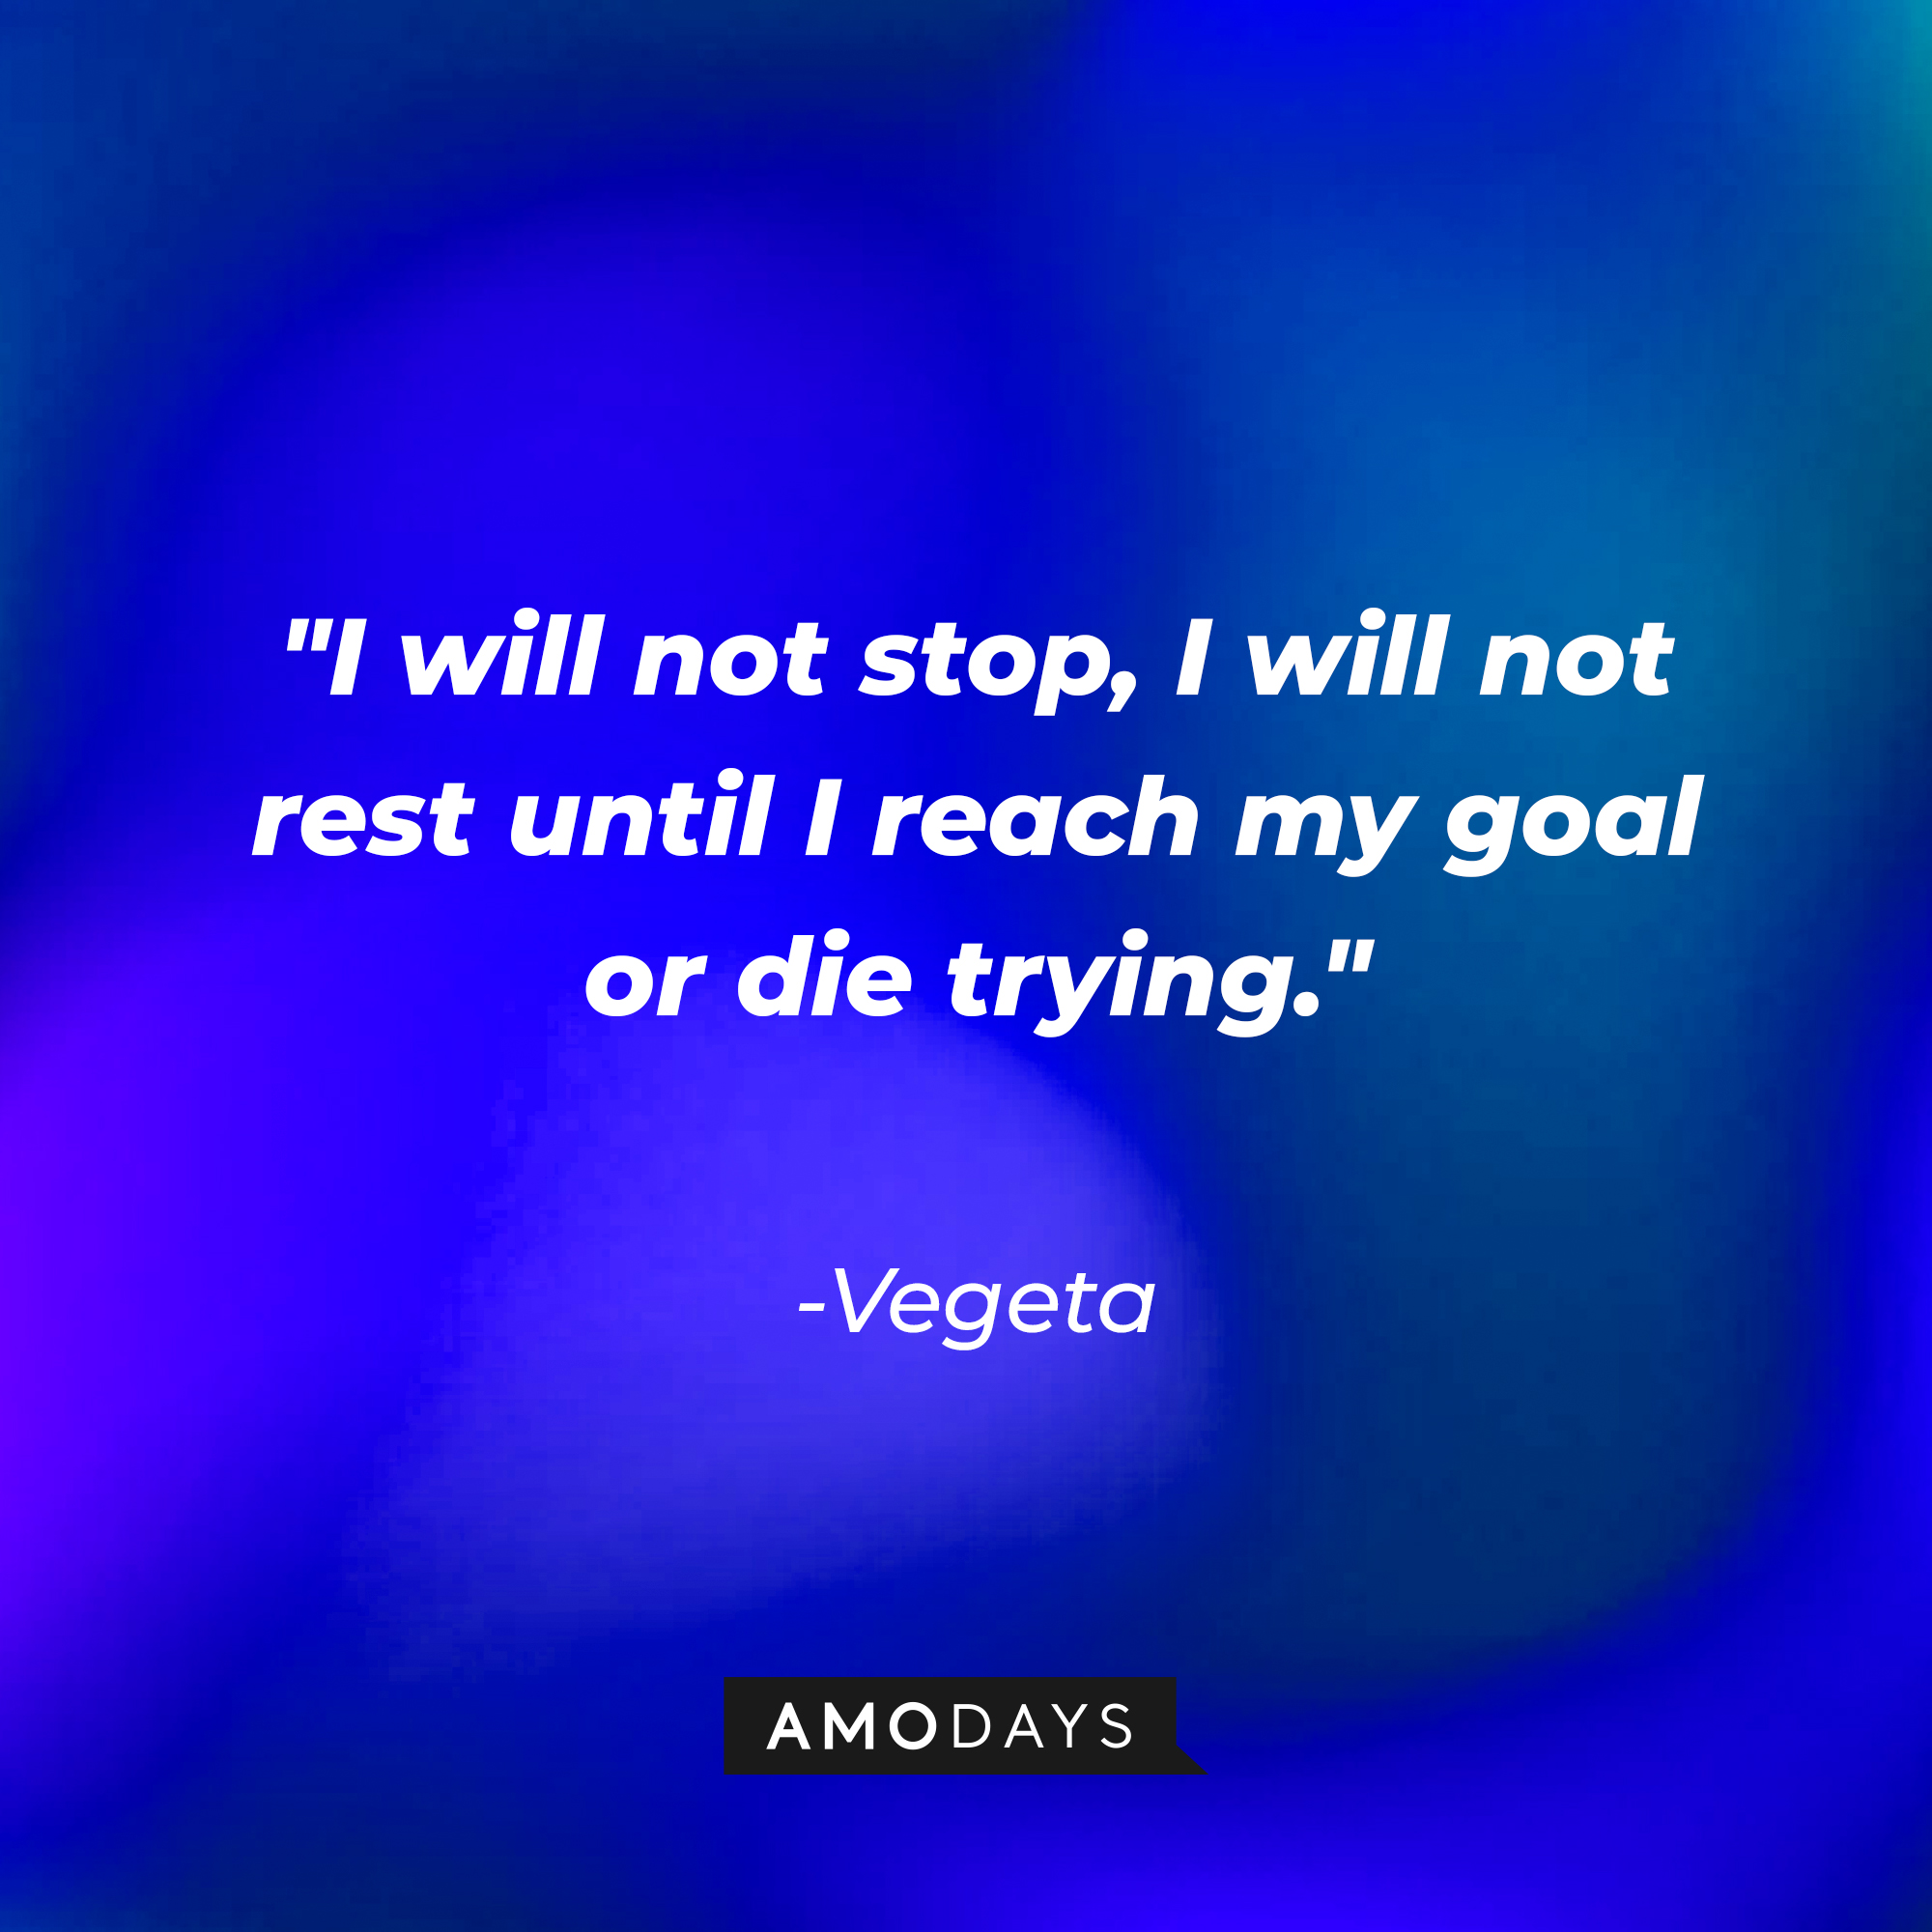 Vegeta's quote: "I will not stop, I will not rest until I reach my goal or die trying." | Source: Amodays